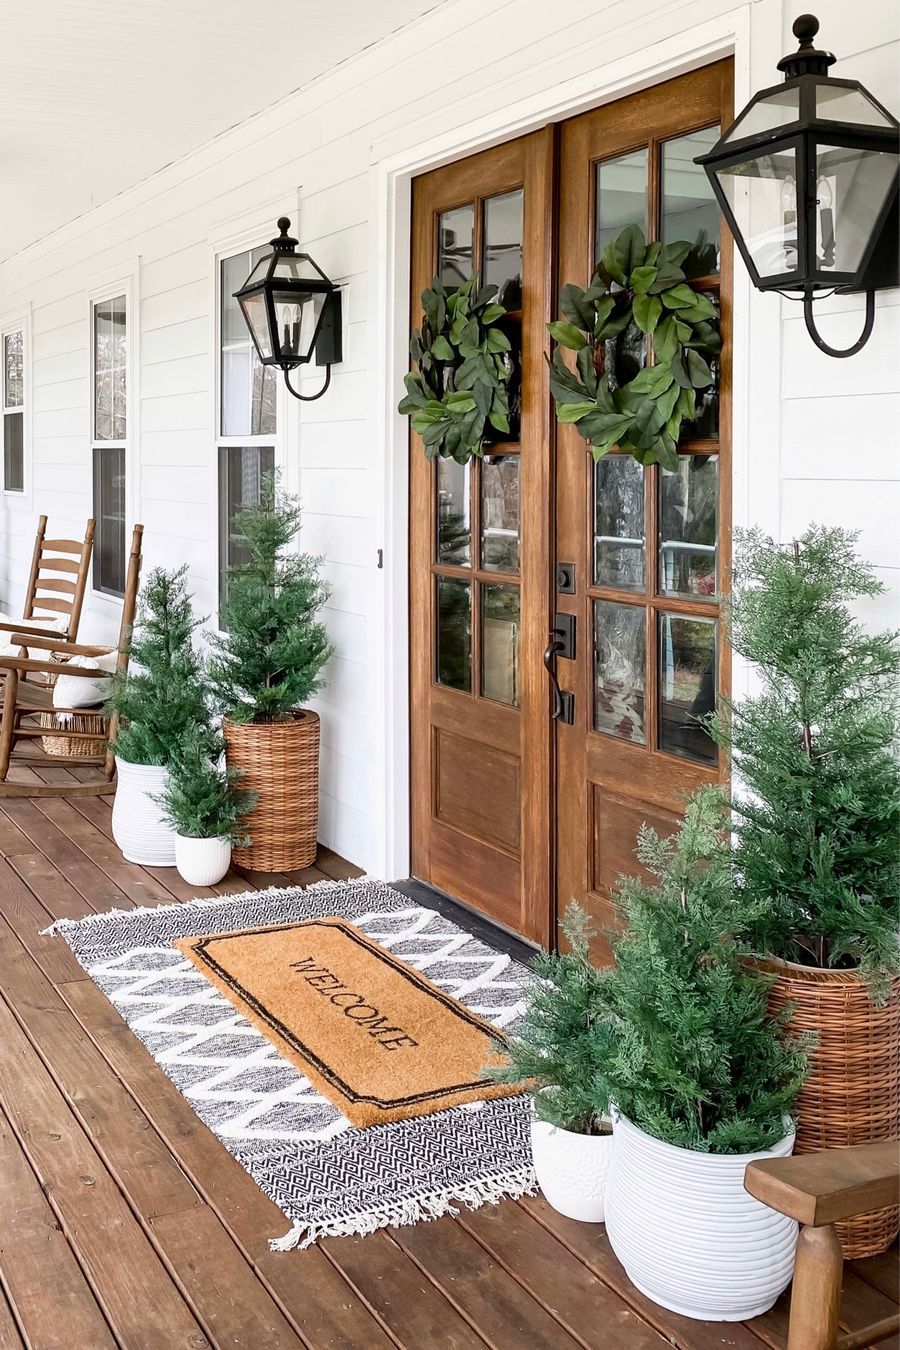 The Charm of Front Porches: Creating a
Welcoming Entryway